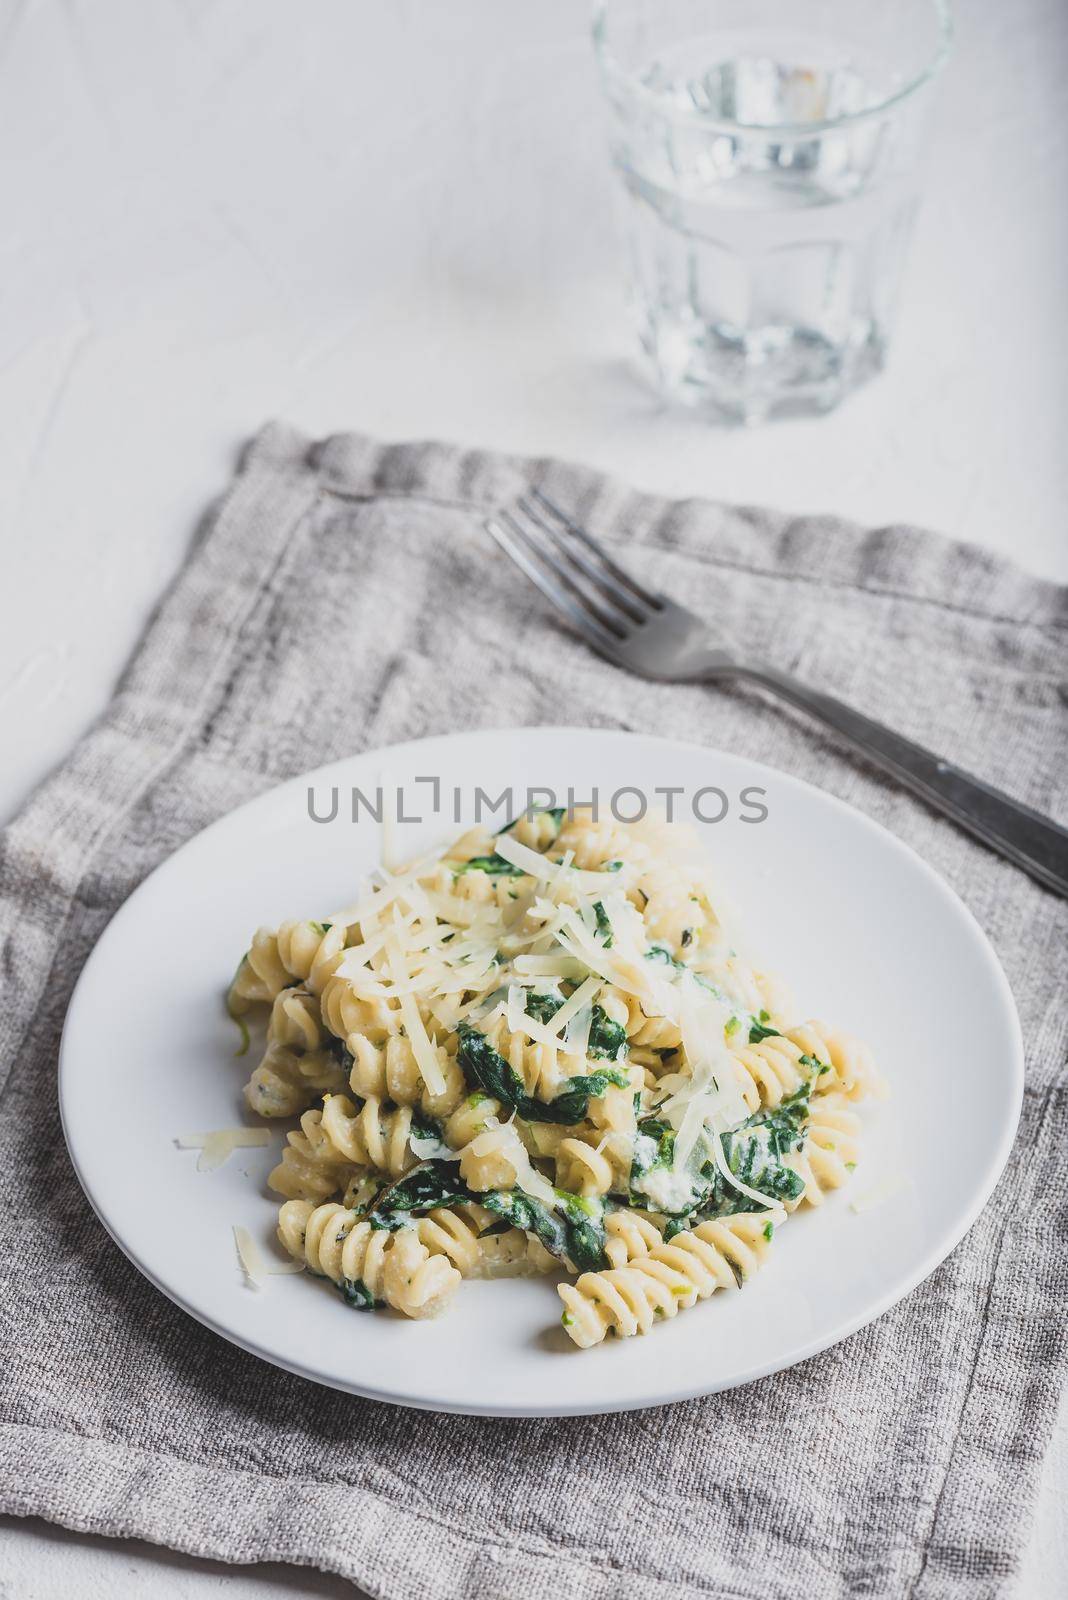 Pasta With Spinach And Cheese by Seva_blsv